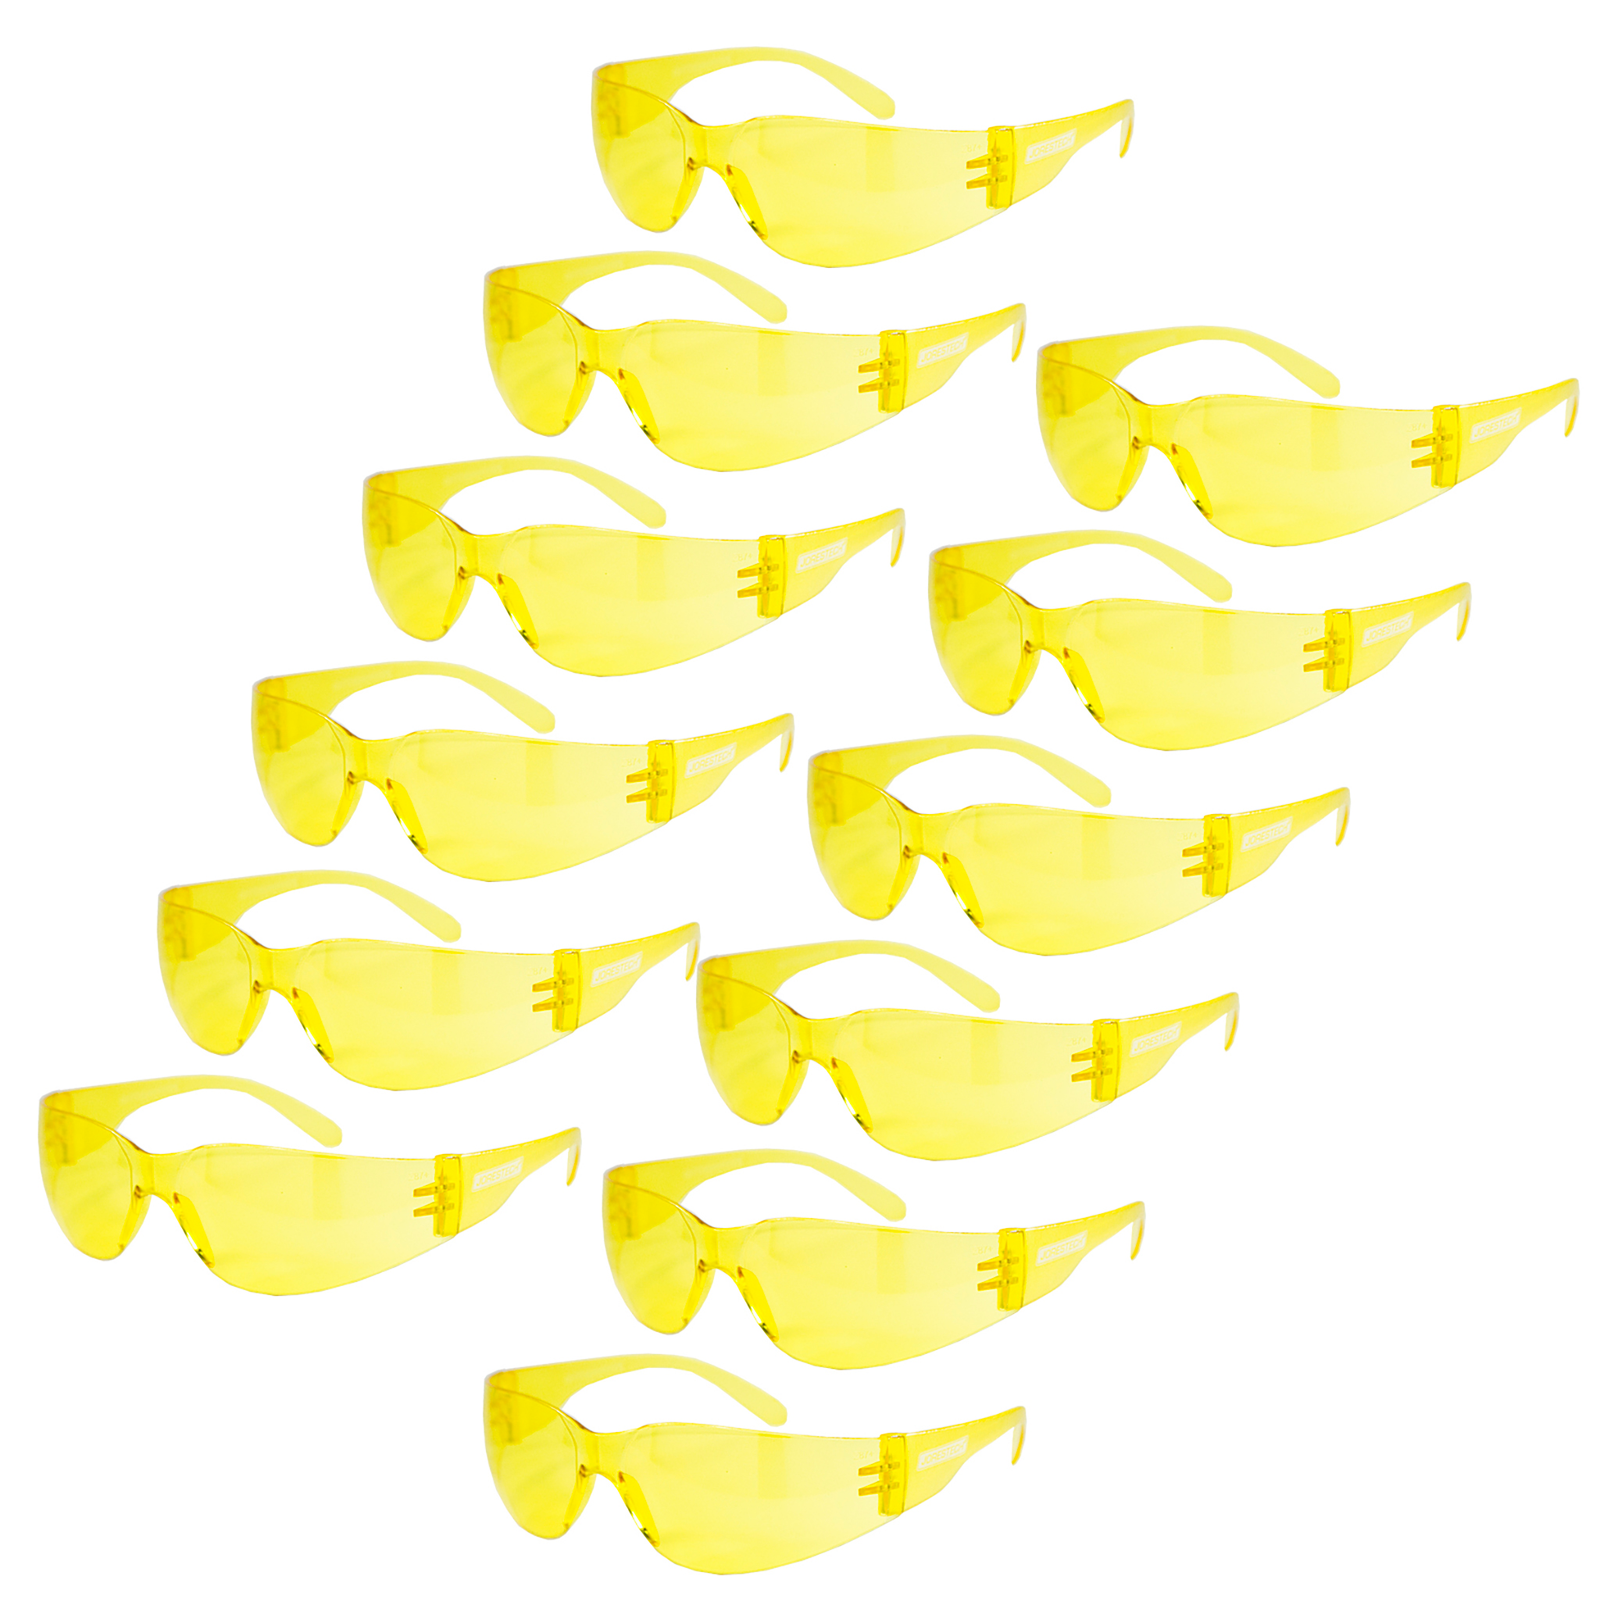 12 yellow JORESTECH Safety High Impact ANSI compliant safety glasses over white background is white